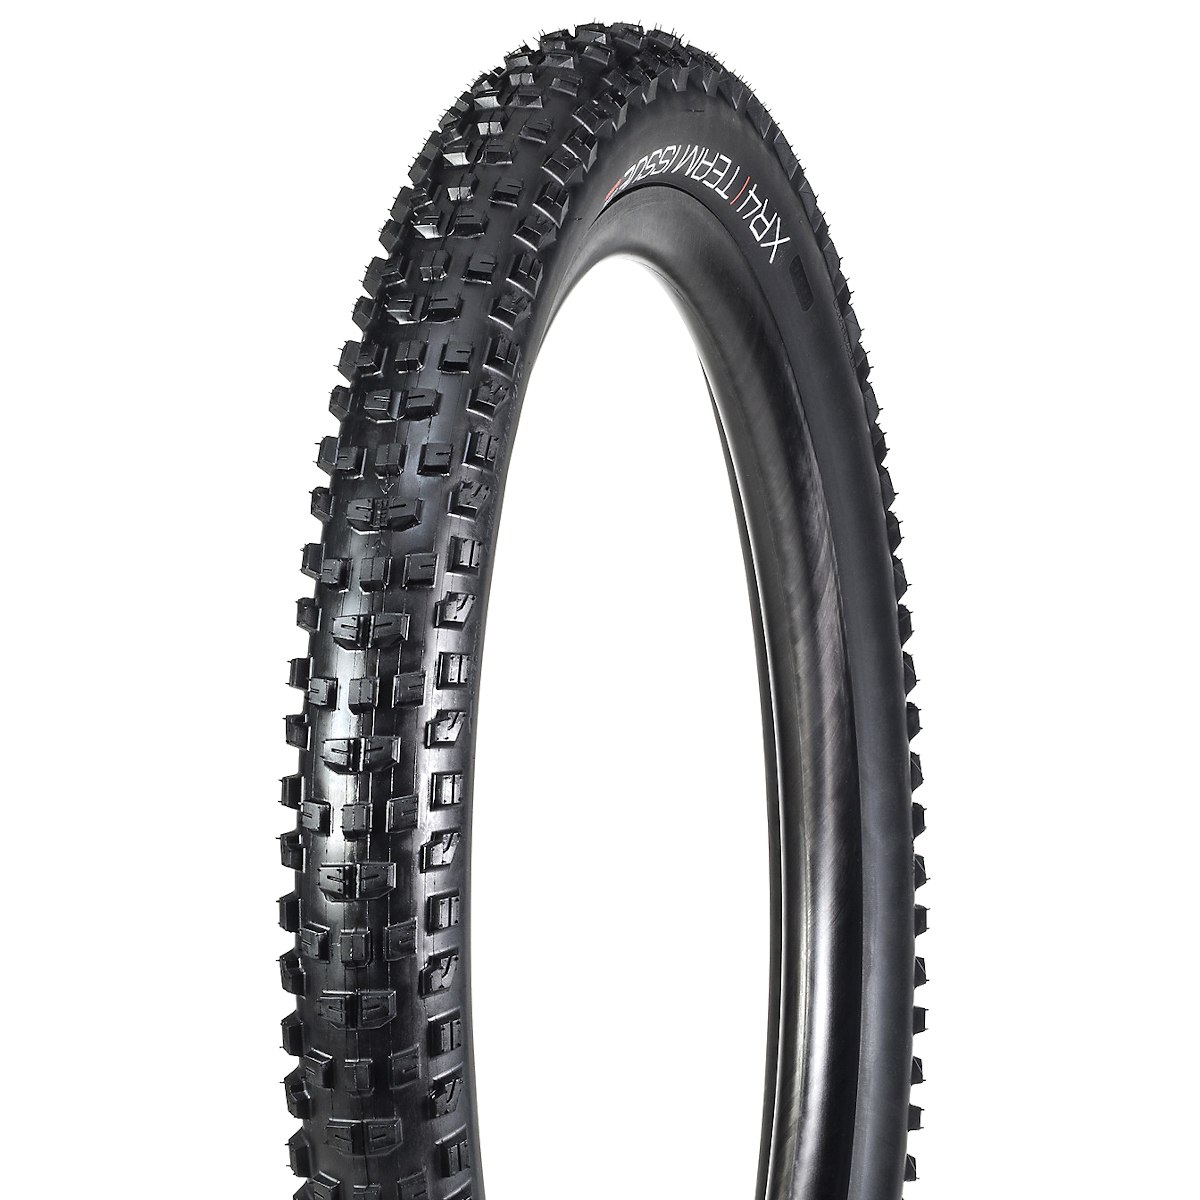 Image of Bontrager XR4 Team Issue TLR MTB Folding Tire - 27.5x2.80"